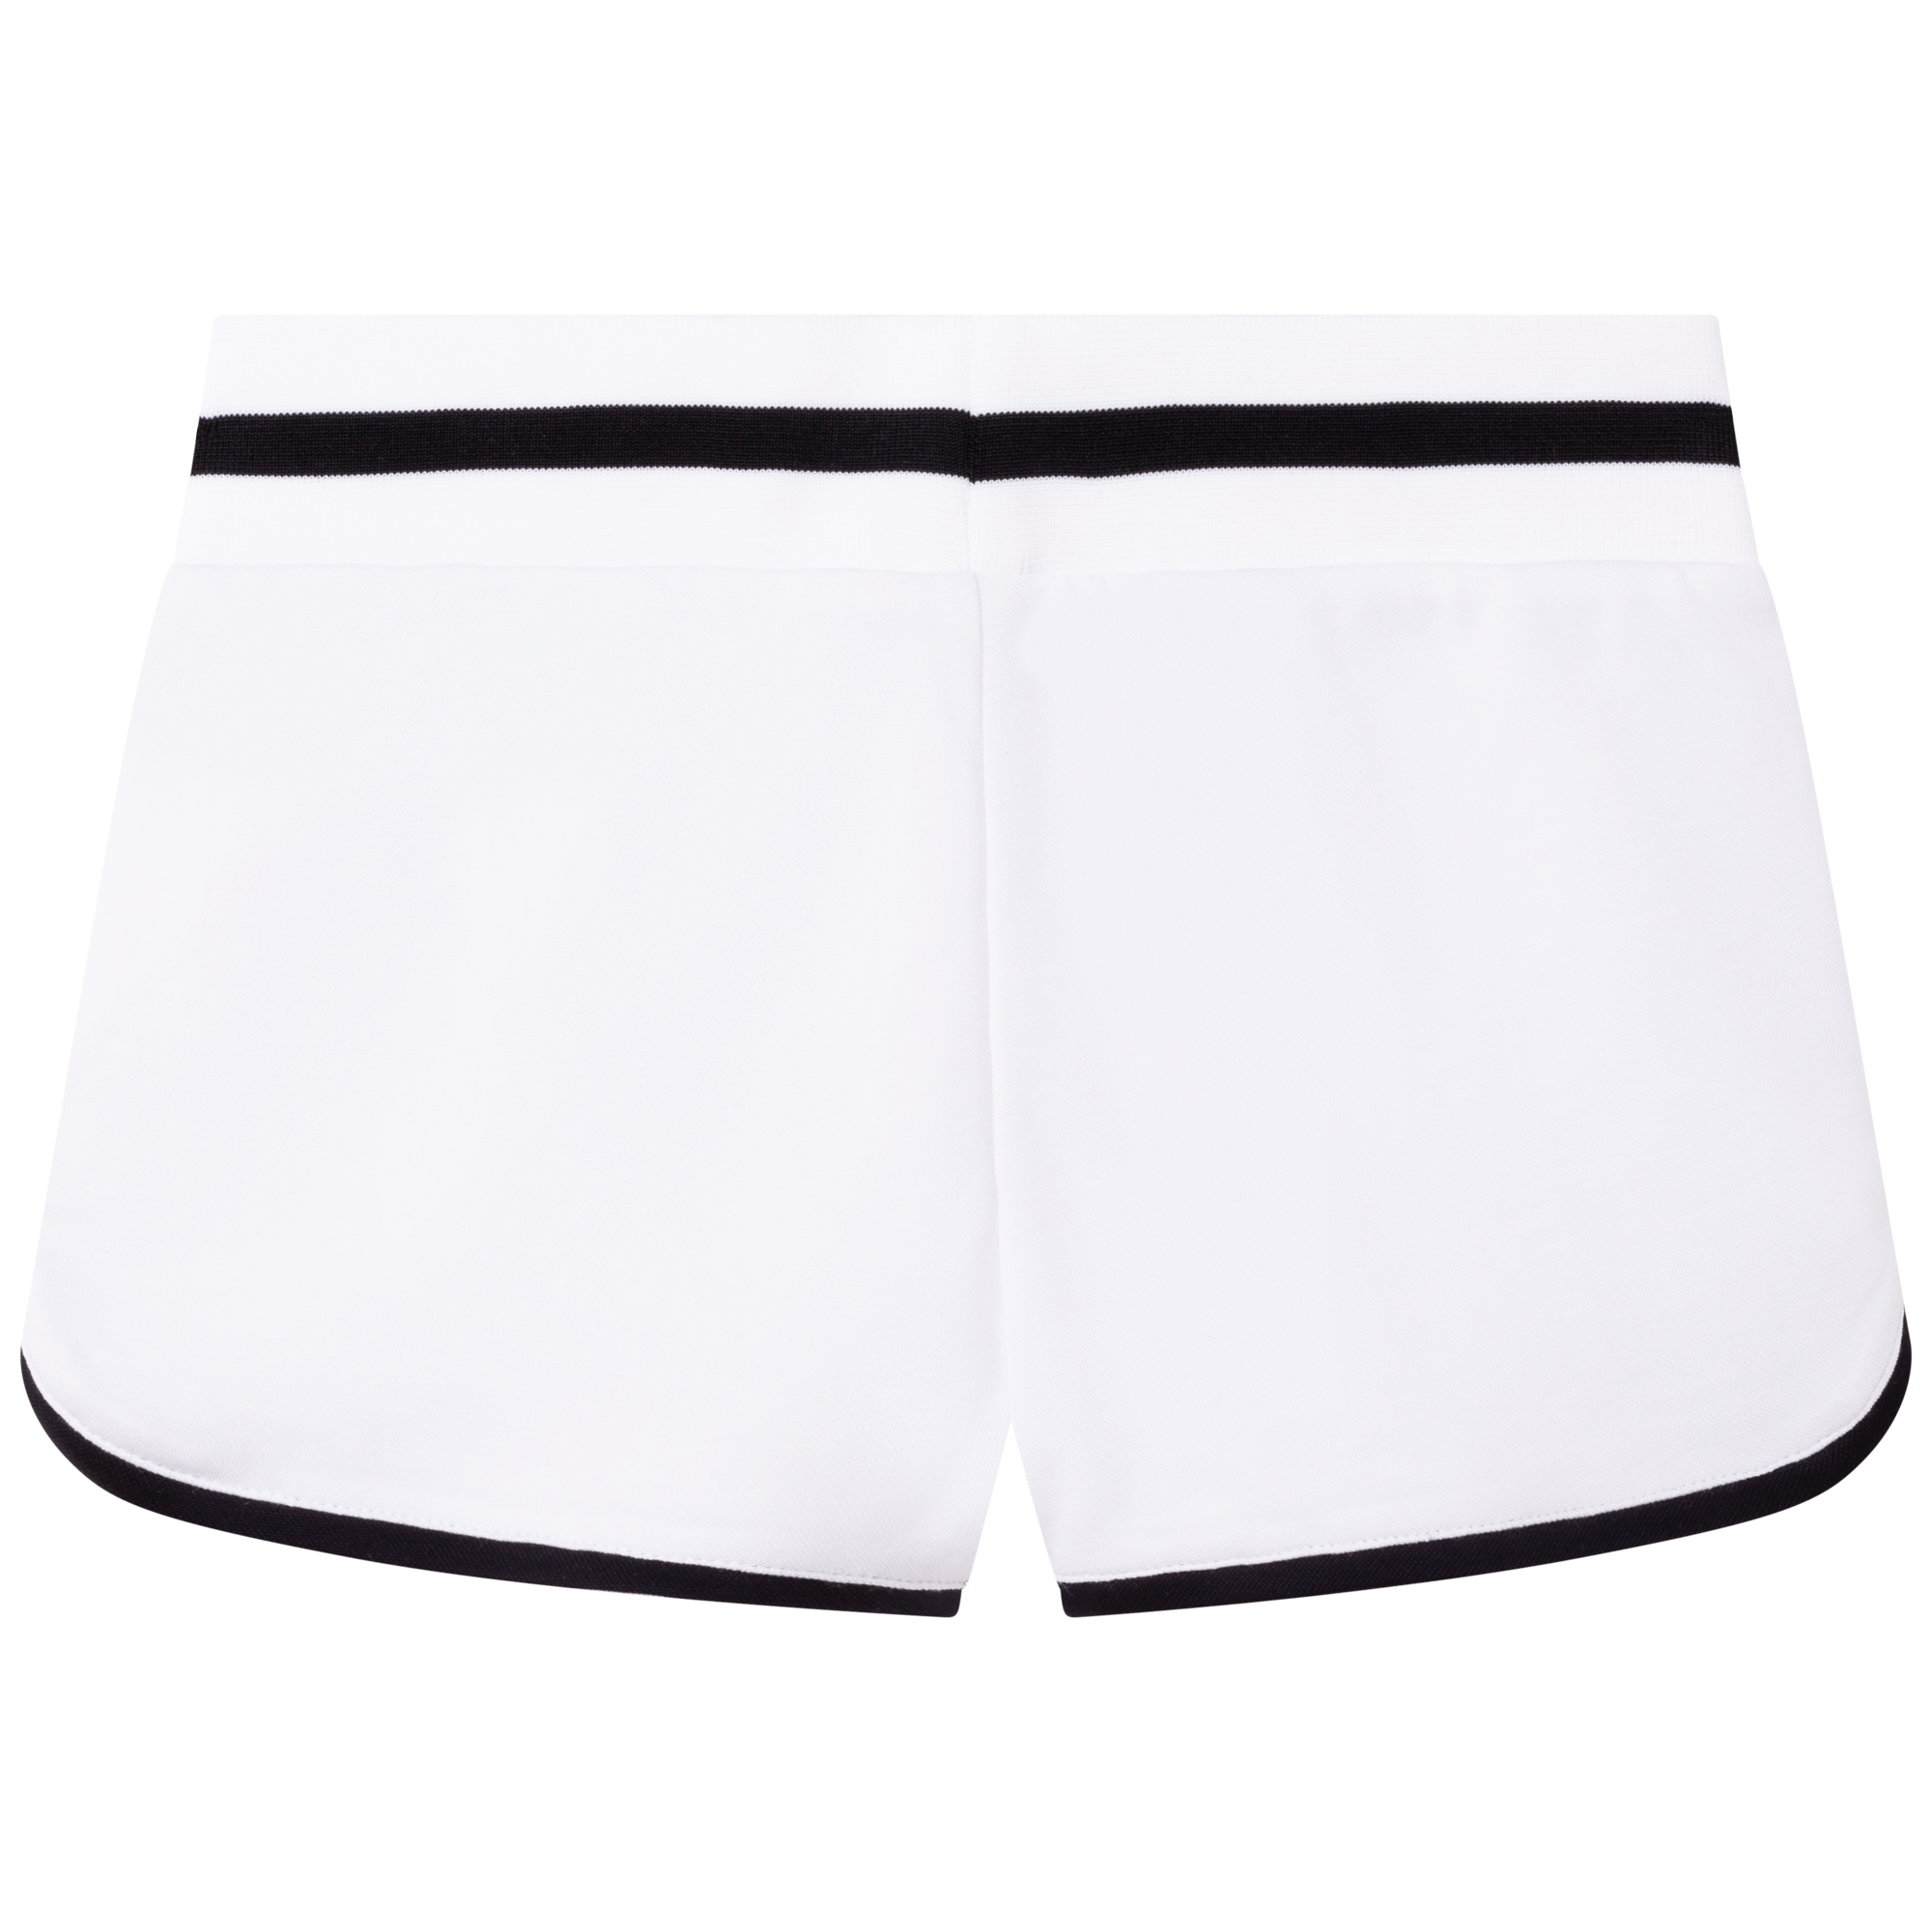 Short shorts with pockets KARL LAGERFELD KIDS for GIRL